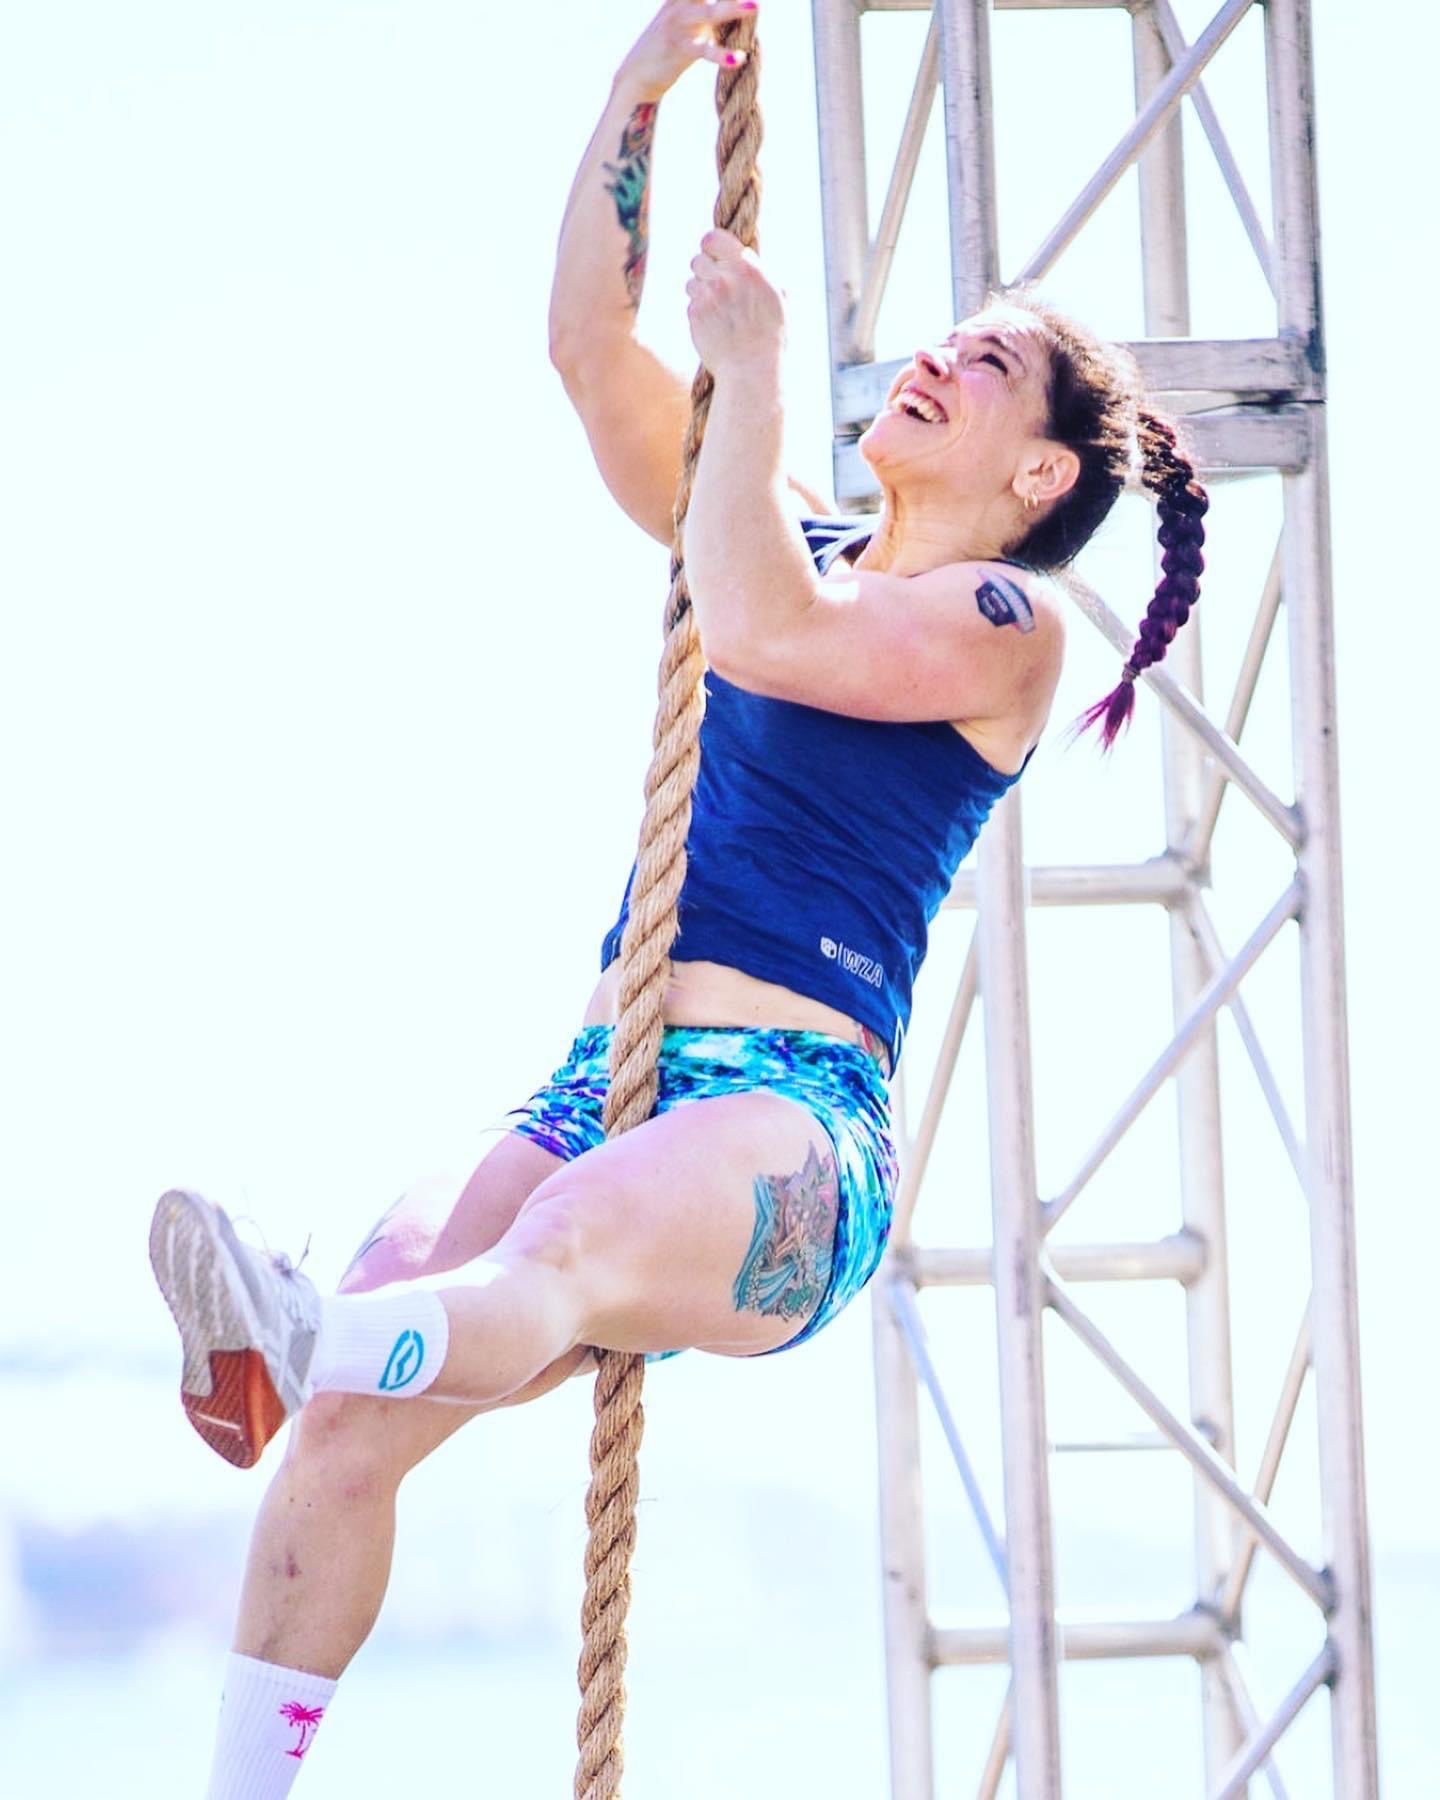 PRIME PT Course instructor Dr. Tami scales a rope at a CrossFit competition.